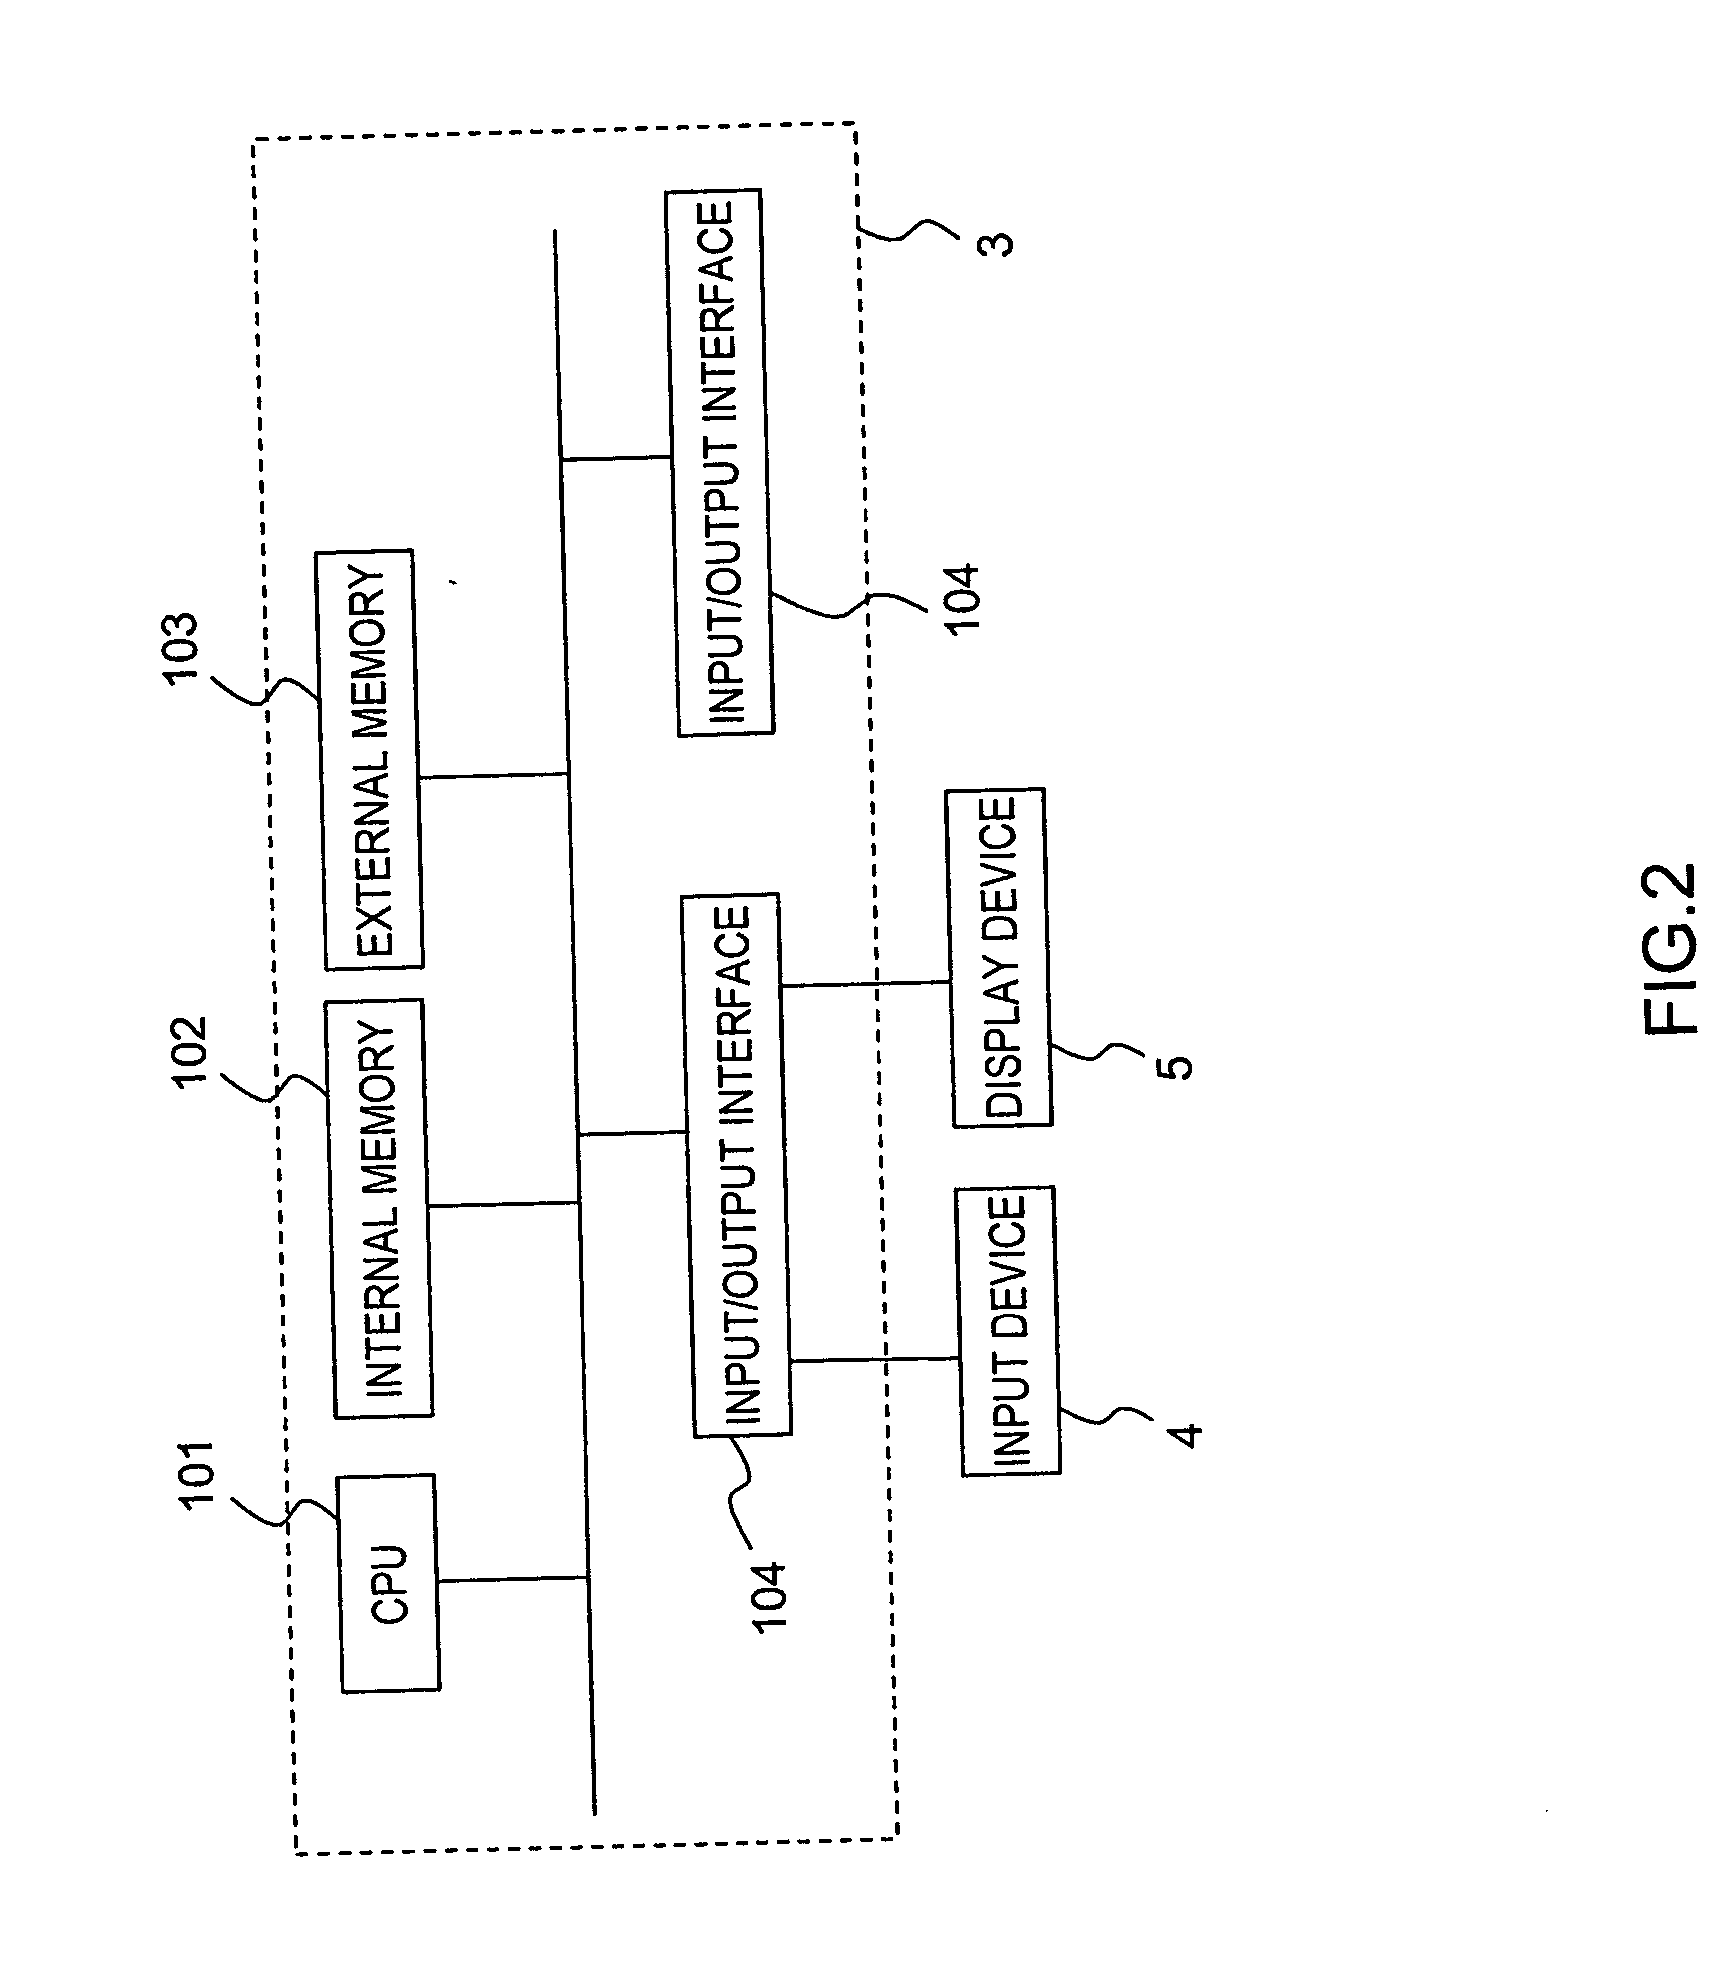 Apparatus and method of cataloging test data by icons